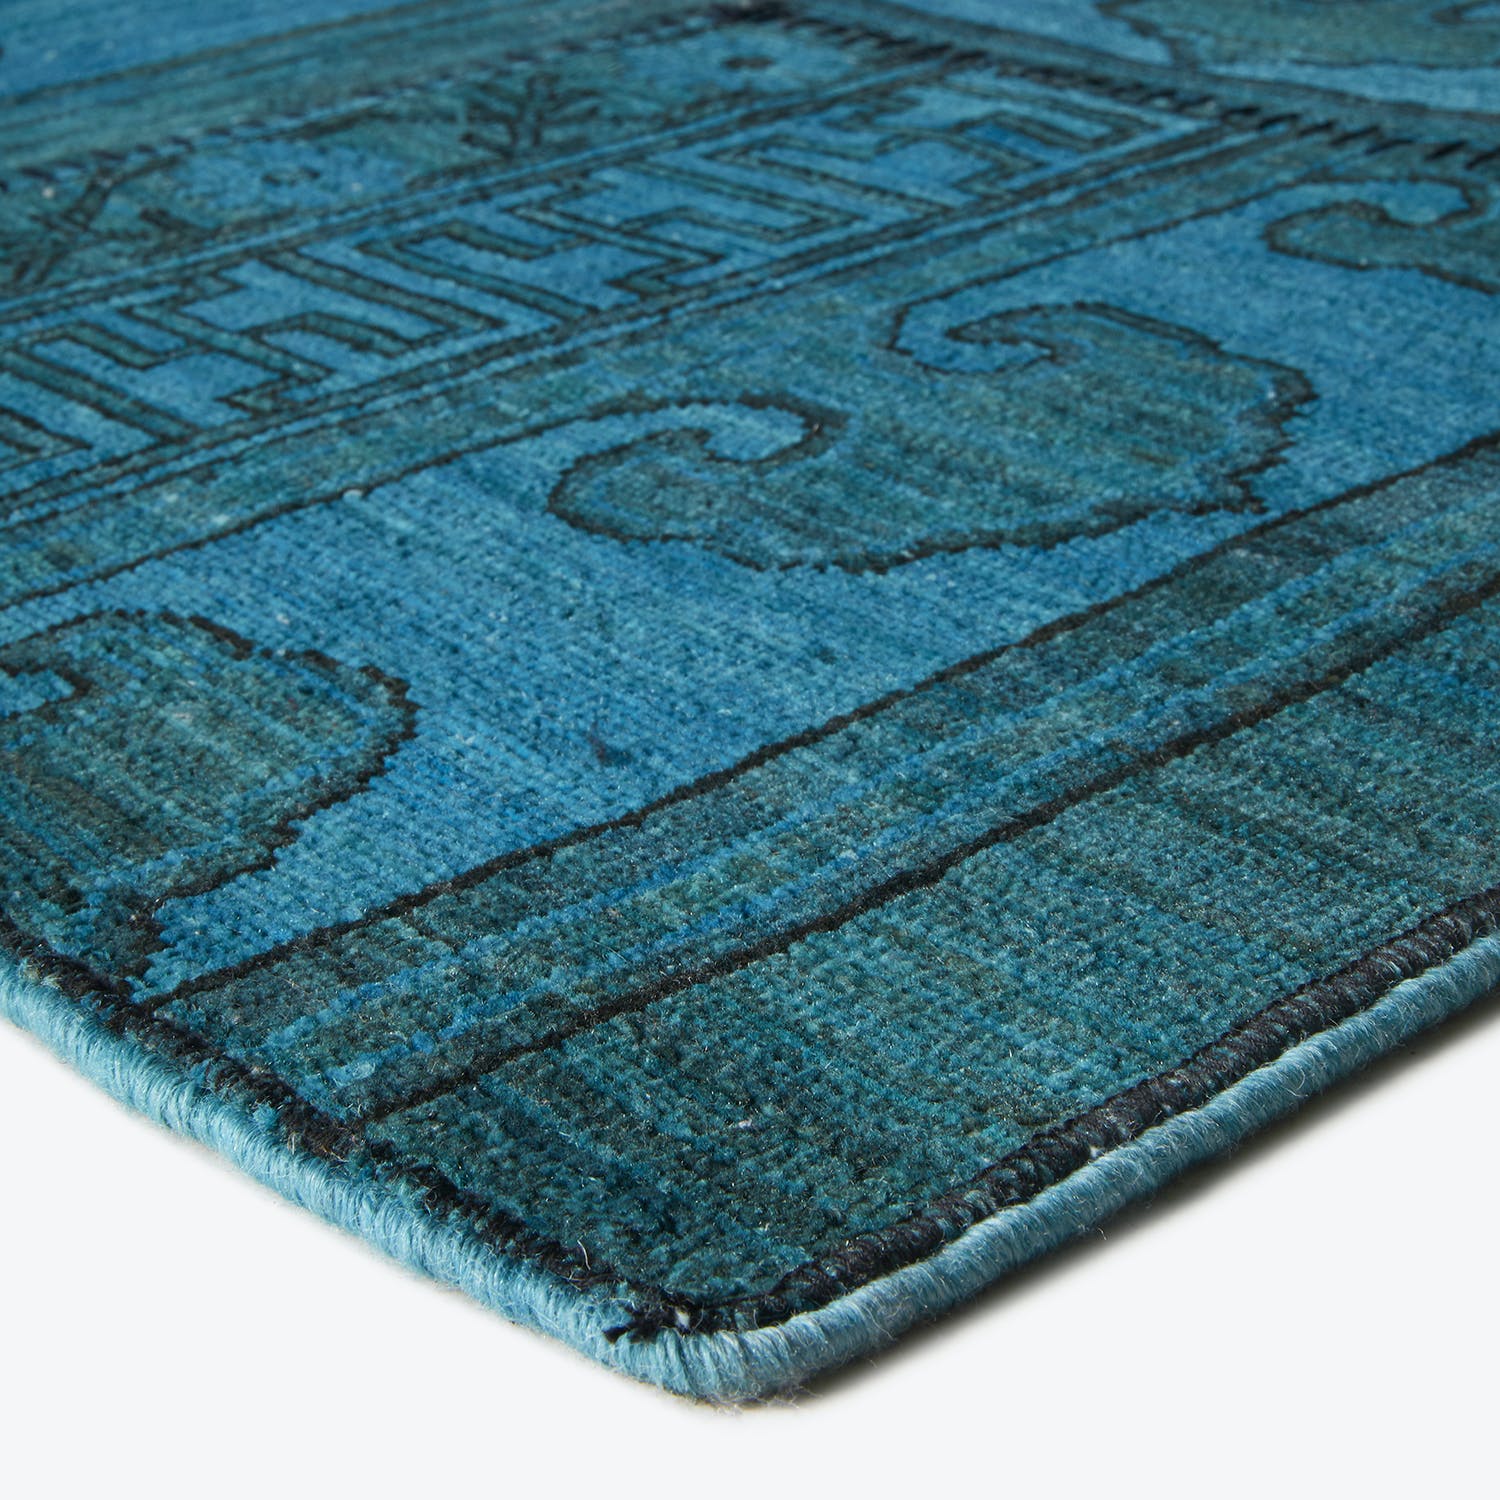 Vibrant turquoise textile showcases intricate patterns and plush texture.